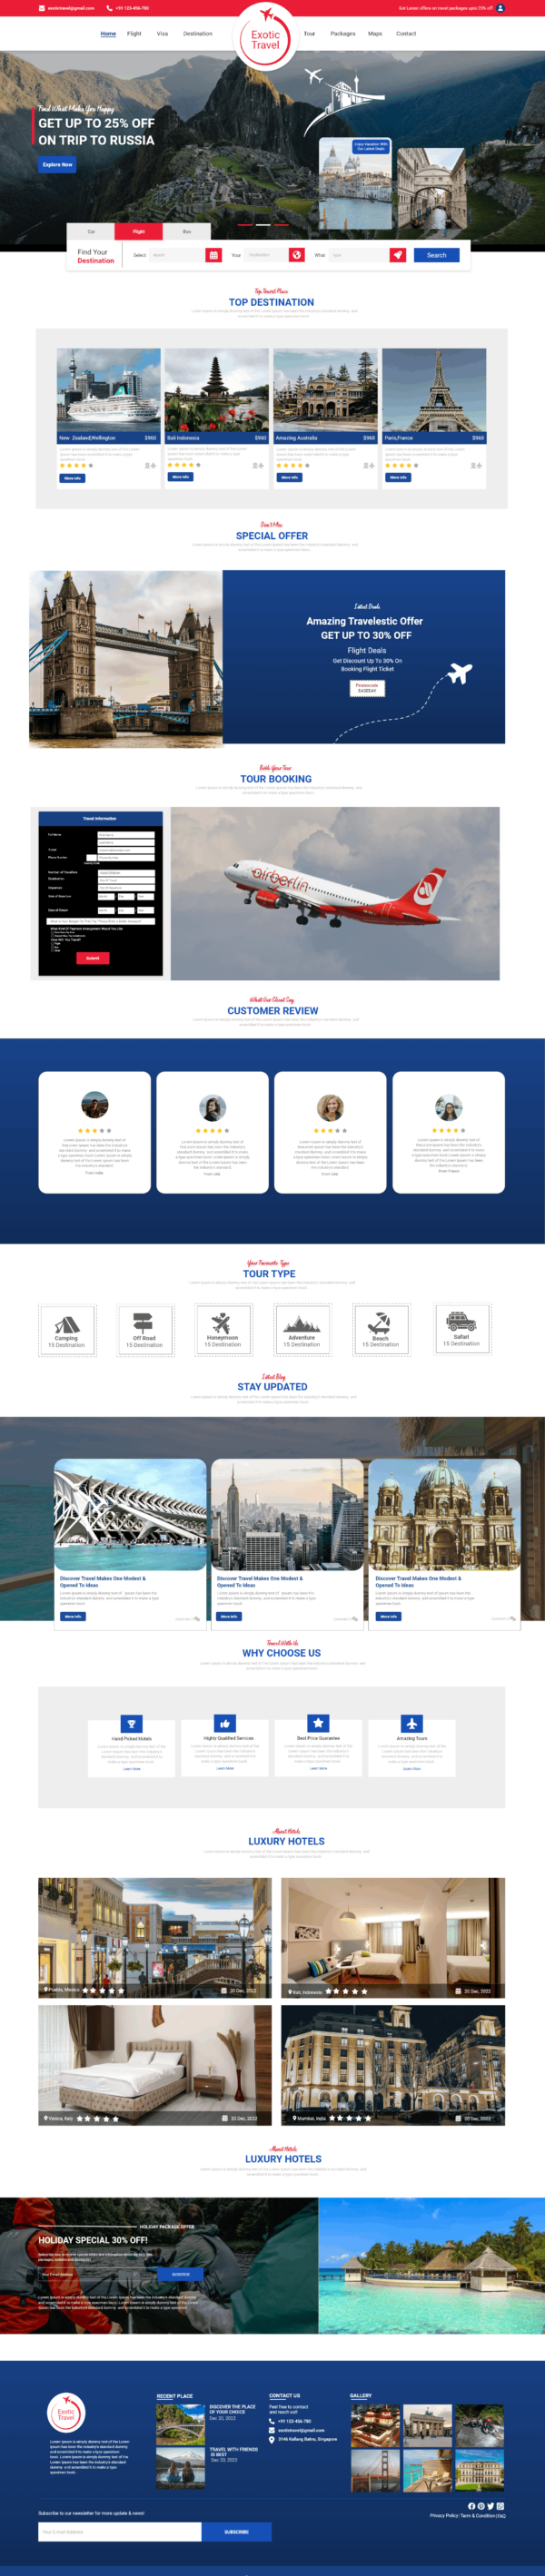 travel Booking Website Template